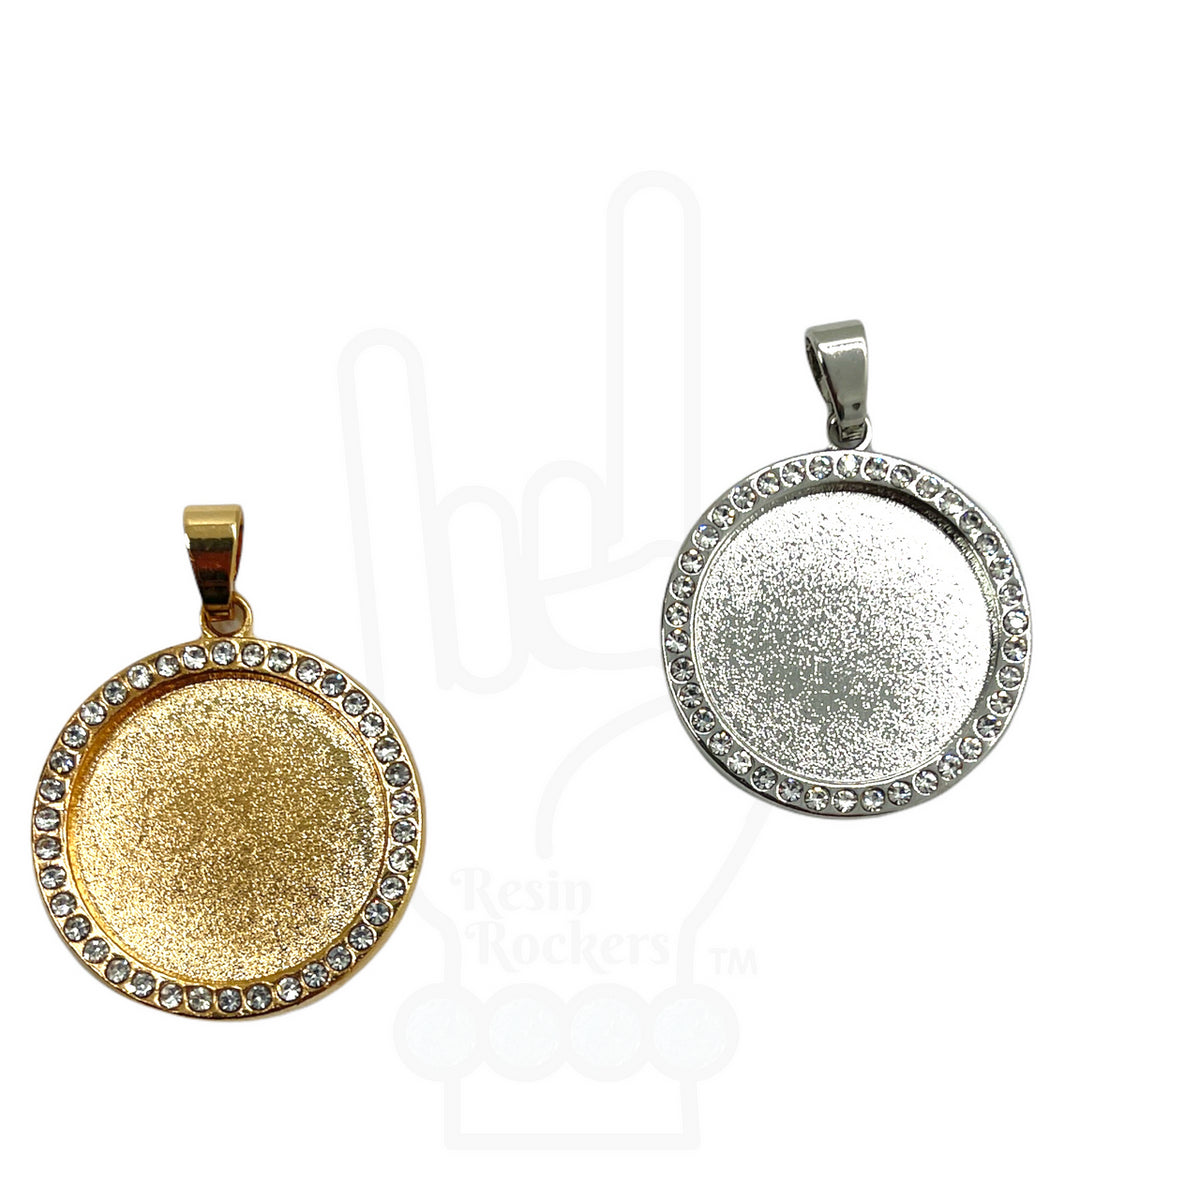 20mm Round Bezel with Rhinestones &amp; Pinch Clips Pendant Blank for UV or Epoxy Resin